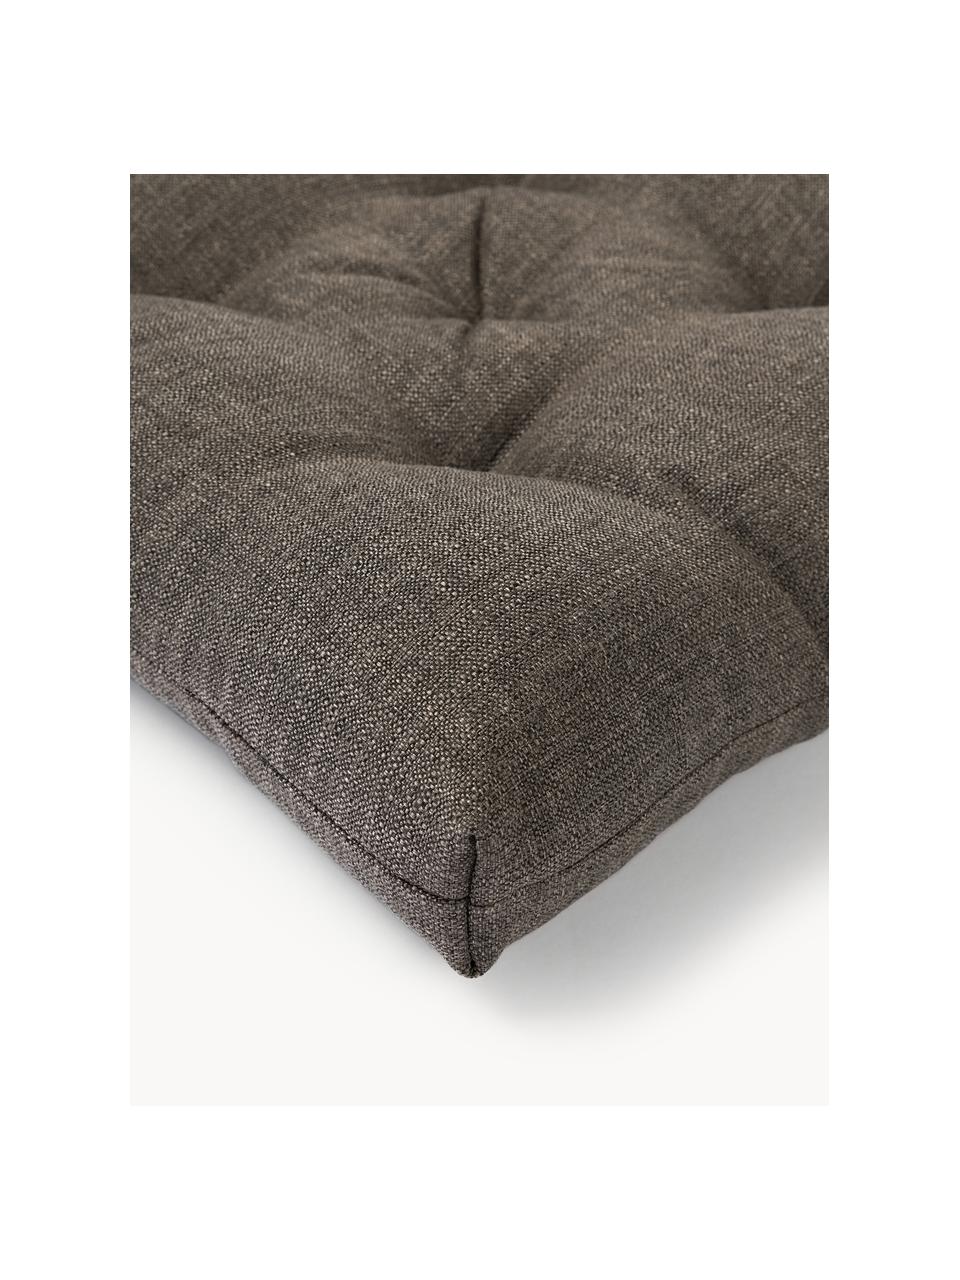 Coussin d'assise Outdoor Oline, 2 pièces, Taupe, larg. 40 x long. 40 cm